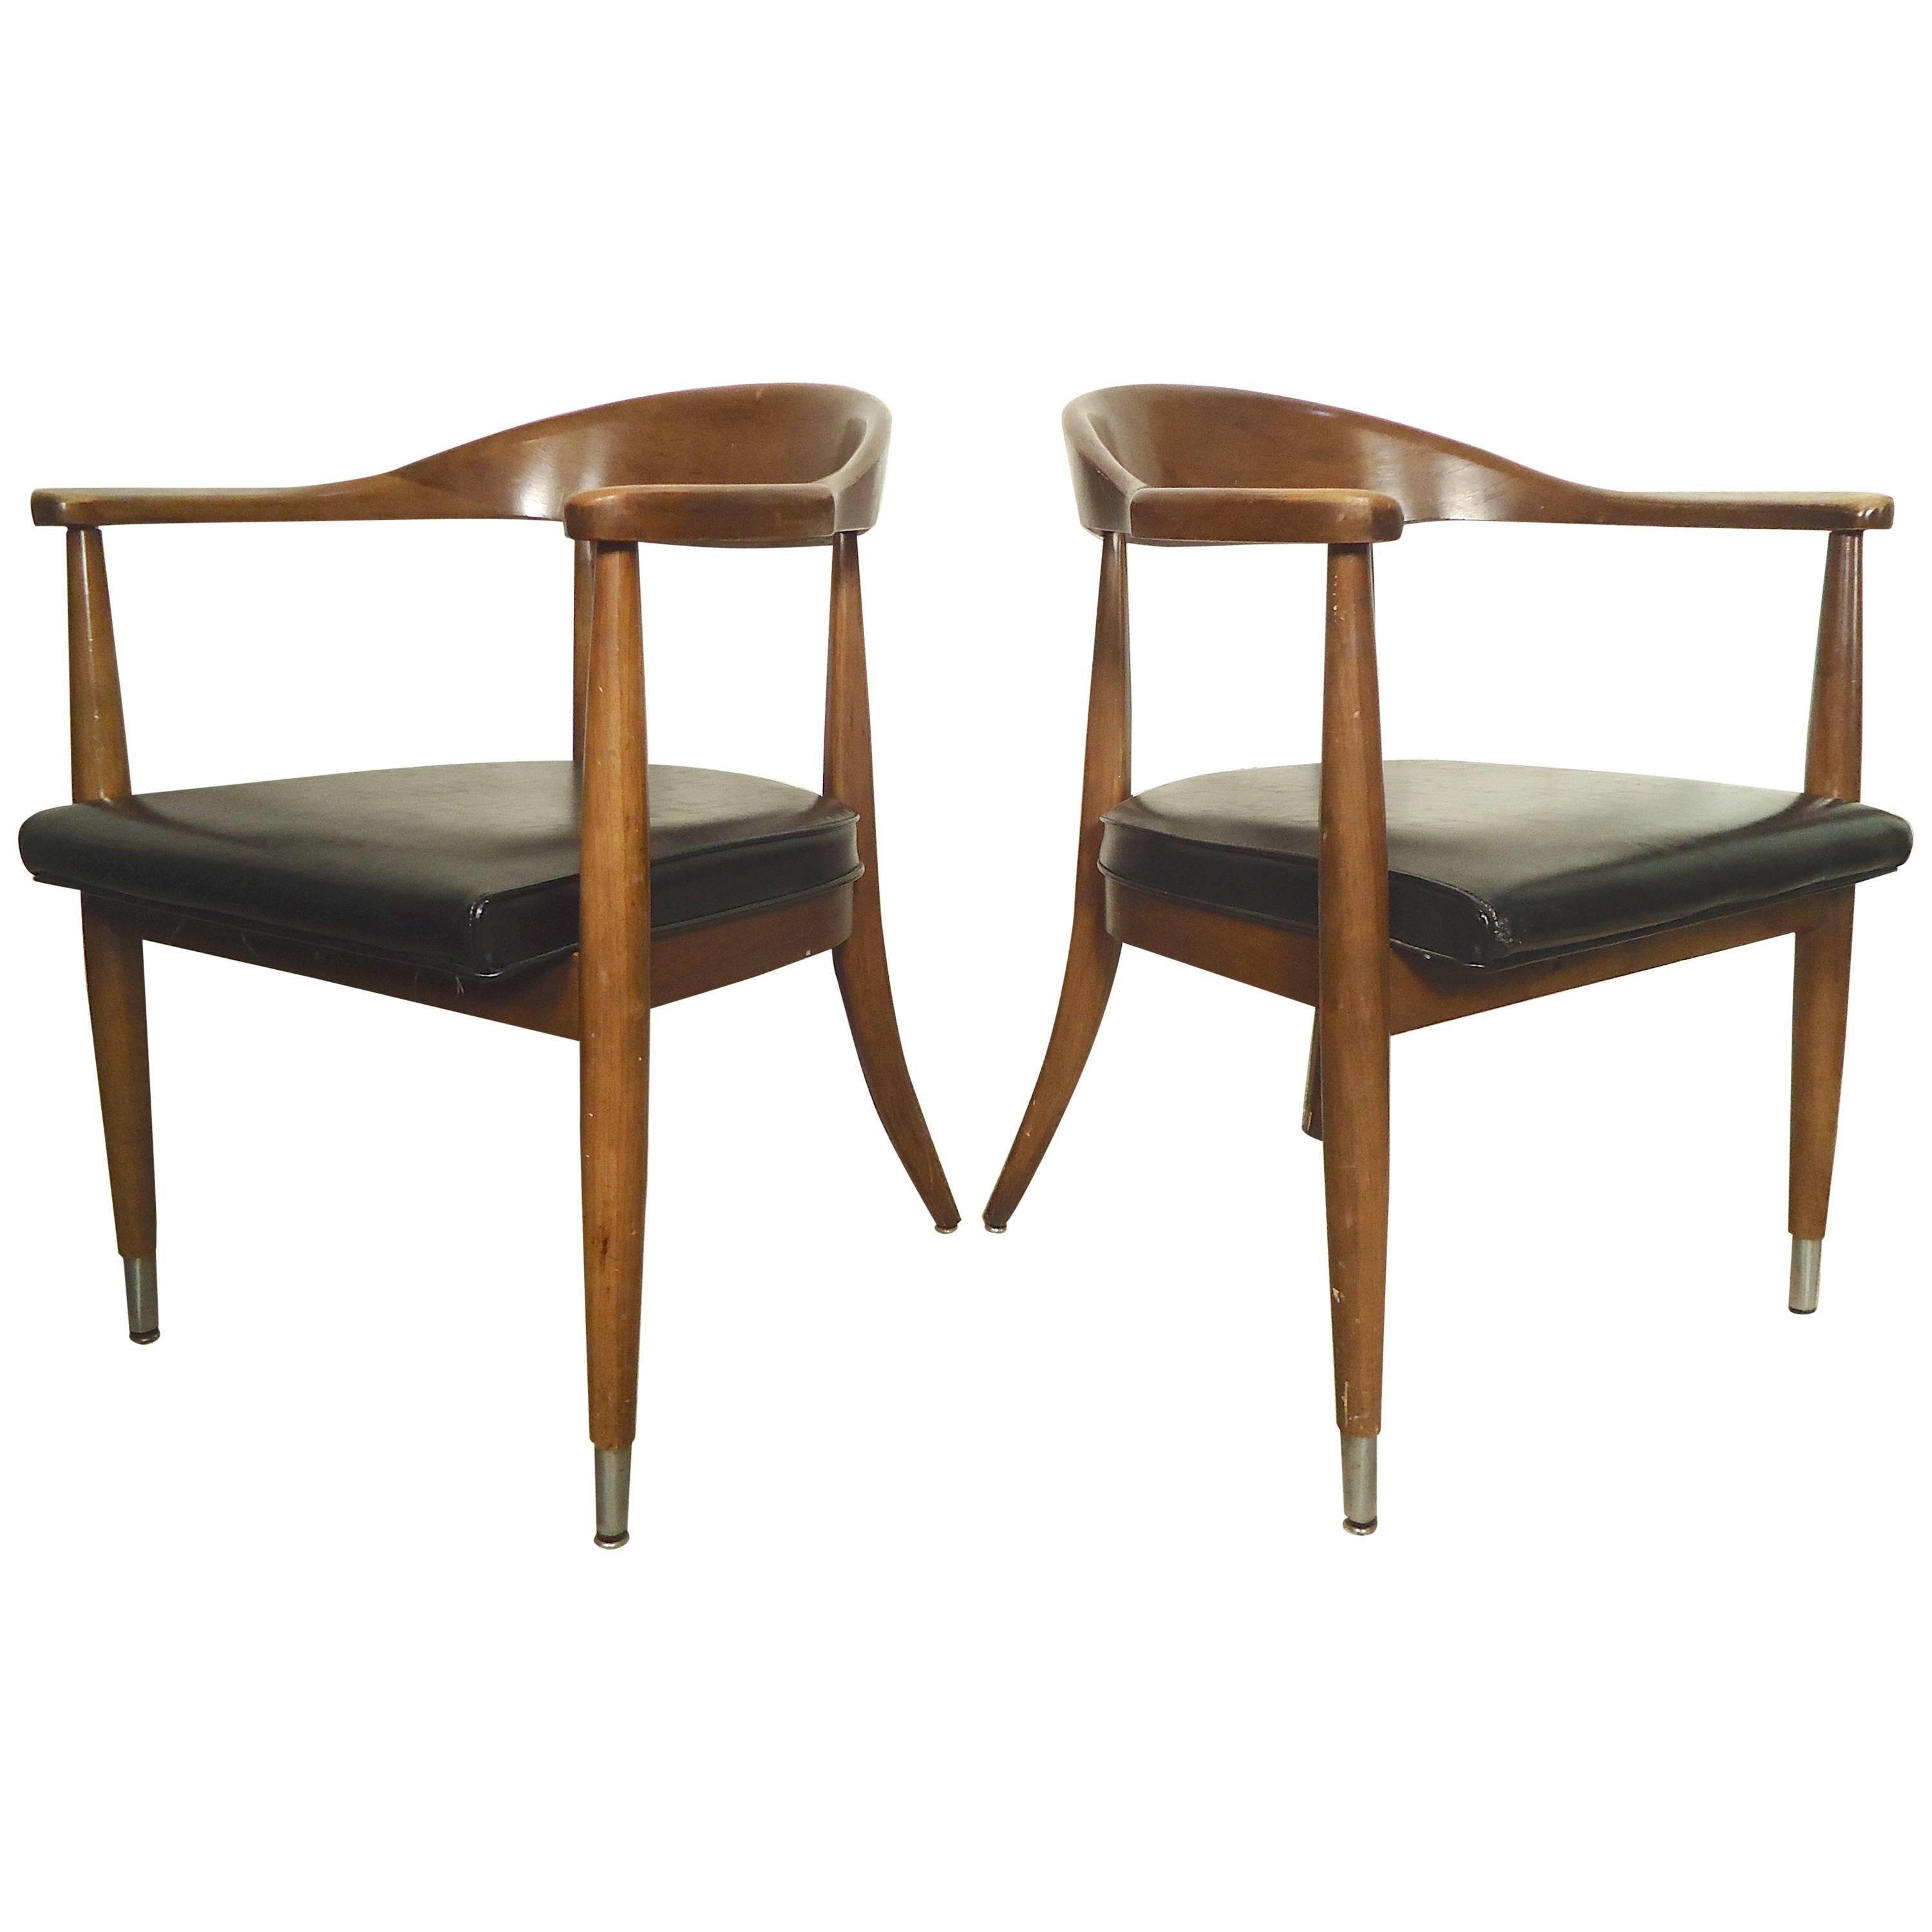 Pair of Mid-Century Modern Round Back Chairs